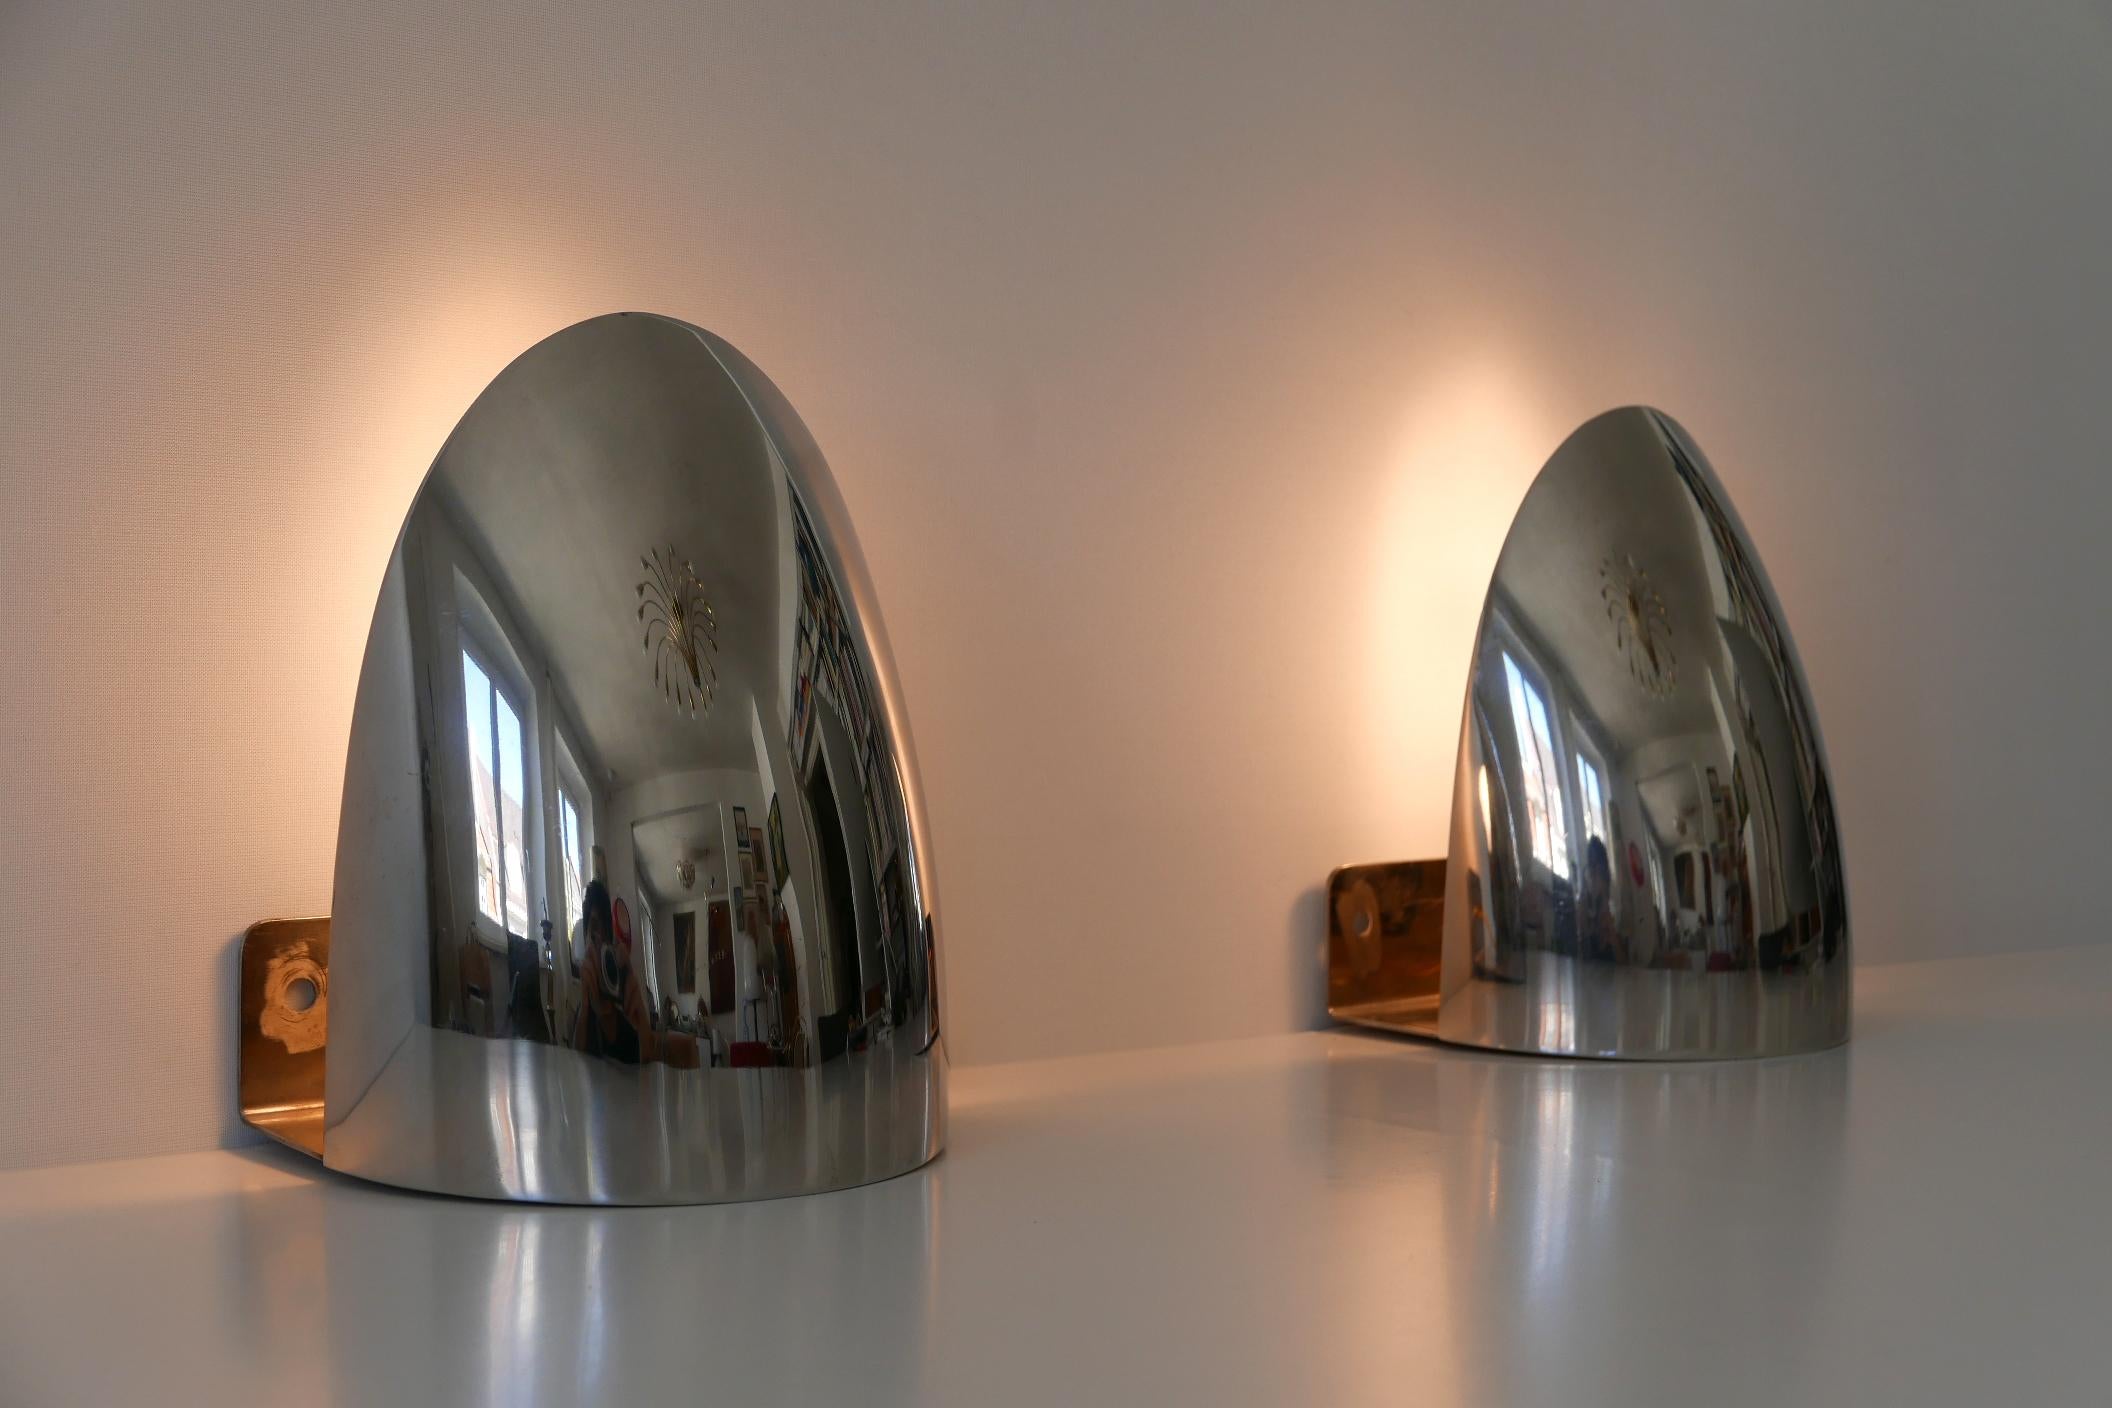 Set of Two Mid-Century Modern Wall Lamps or Sconces, 1970s, Germany For Sale 6